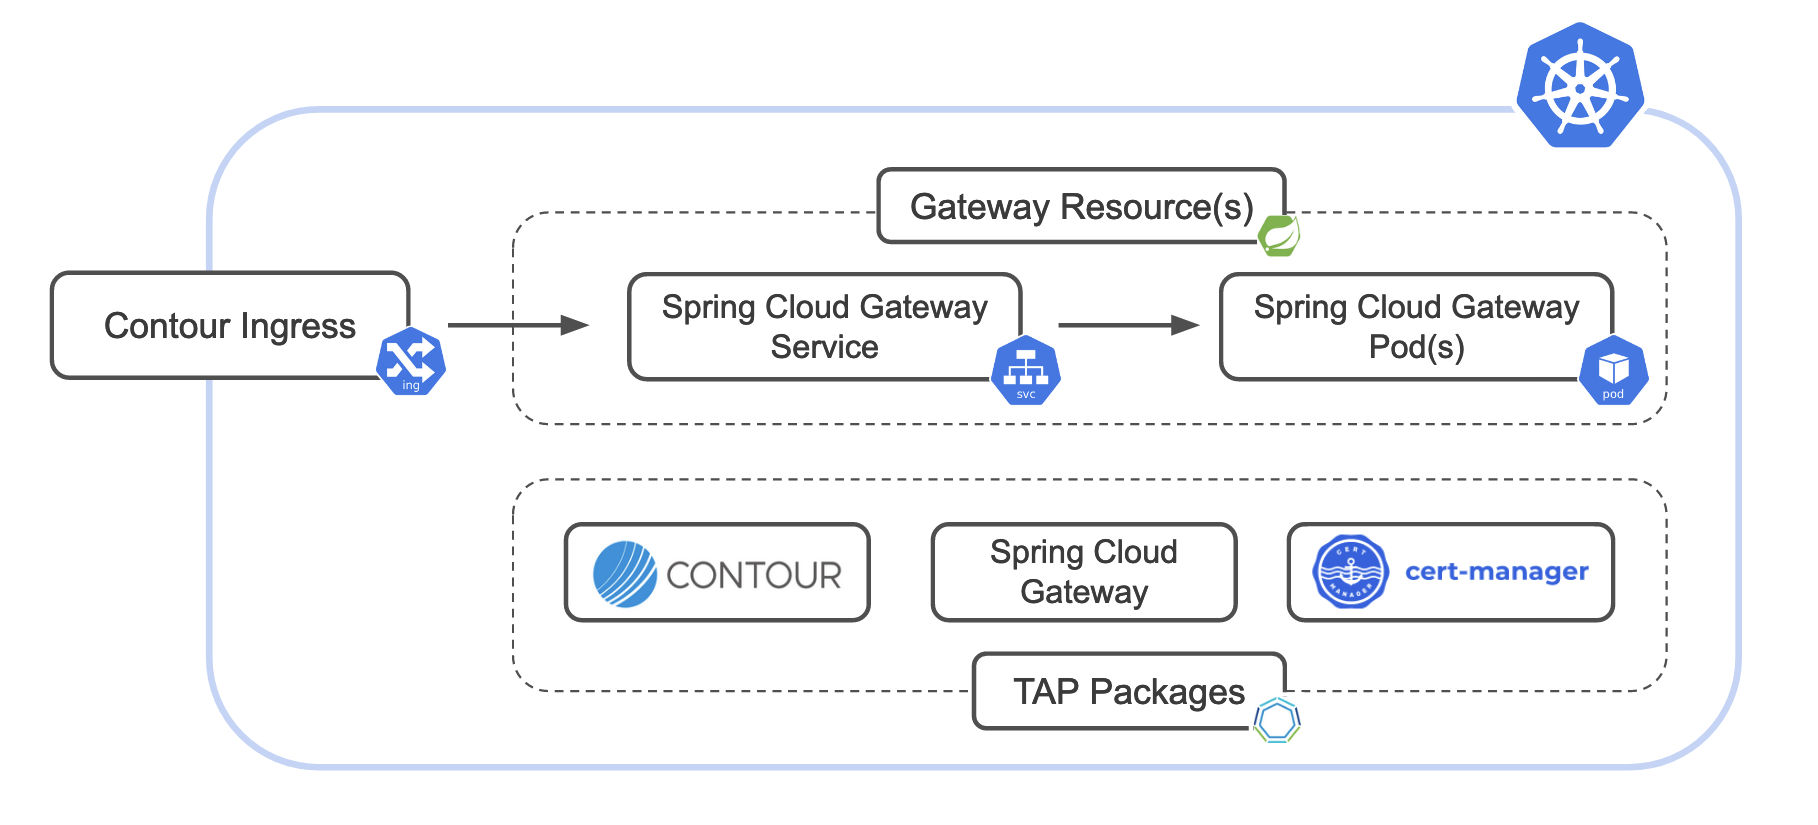 Block diagram of Spring Cloud Gateway in the context of Contour ingress and TAP packages.